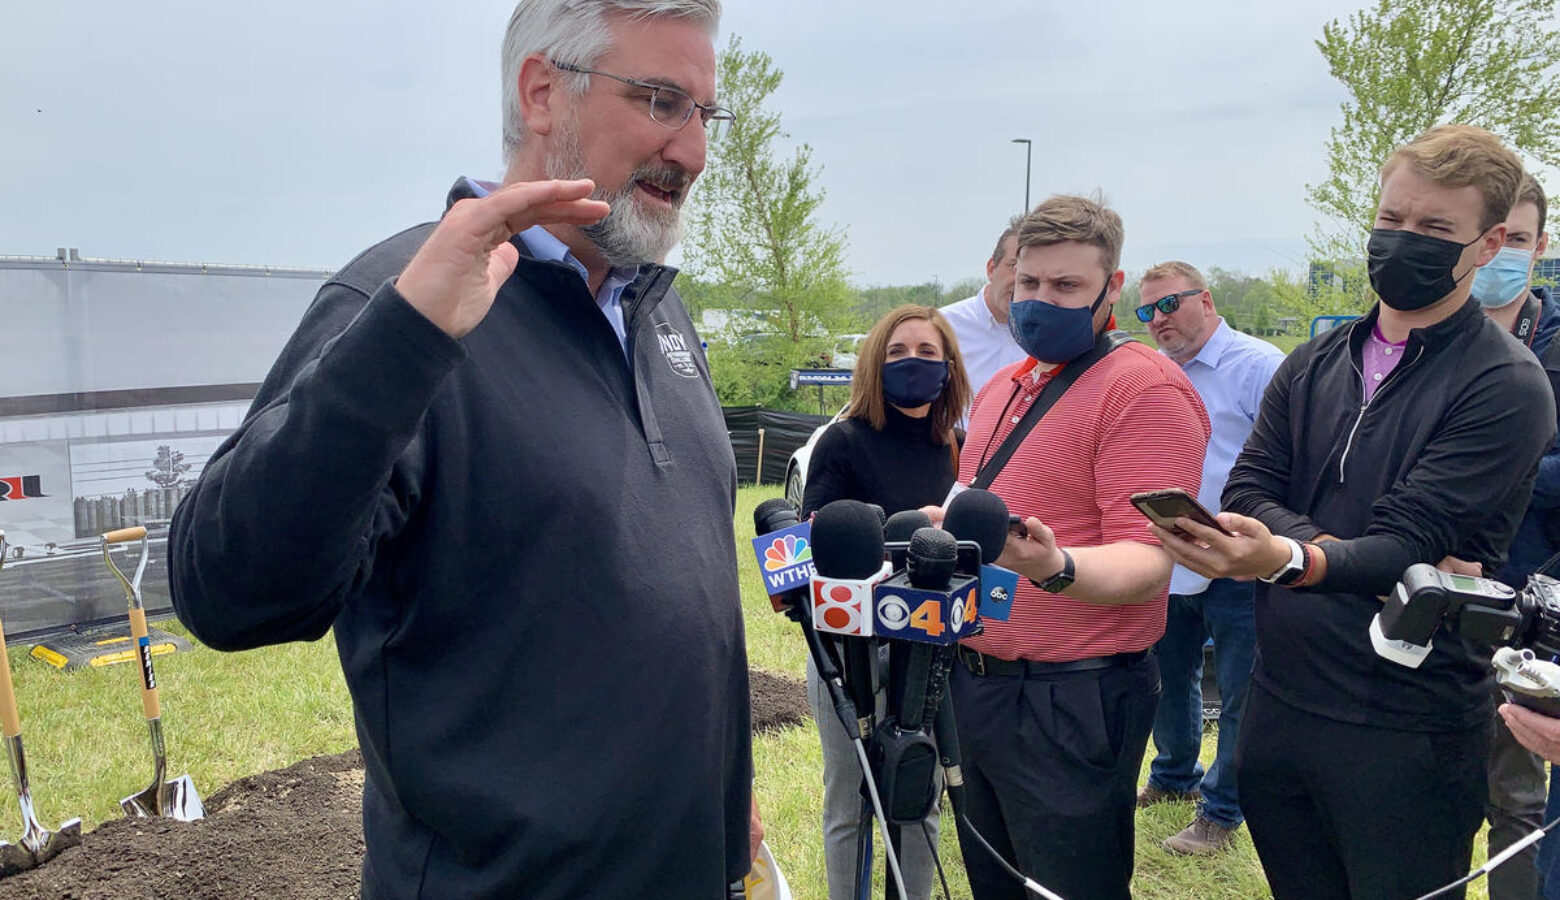 The average number of new COVID-19 cases is nearly triple what it was a month ago, the biggest increase since April 2020. Holcomb did not reimpose COVID-19 restrictions, and said the situation is very different. (Brandon Smith/IPB News)